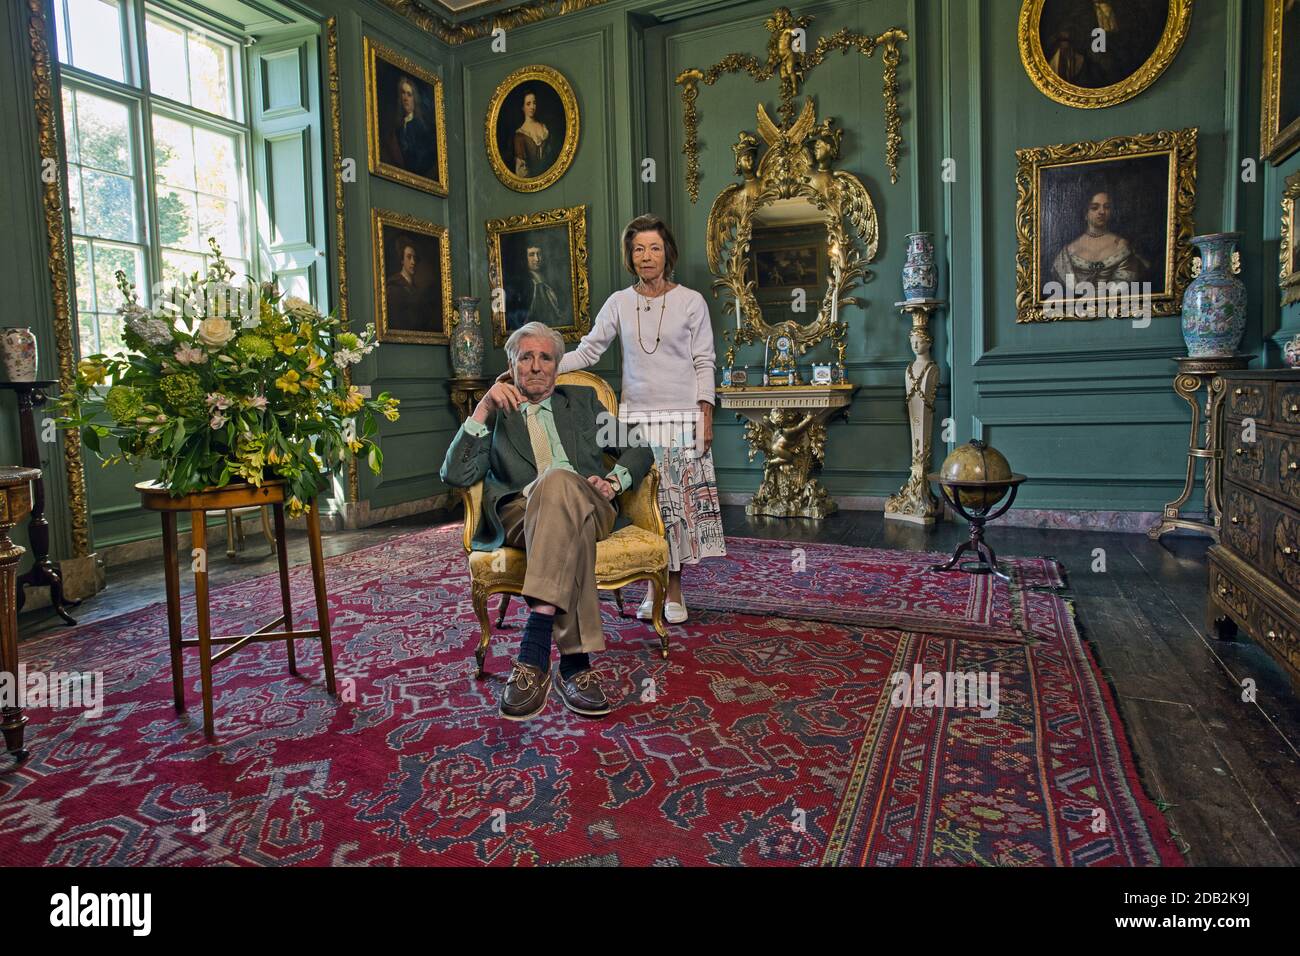 GREAT BRITAIN / England /Cornwall / Padstow / Prideaux Place ; Peter Prideaux Brune with his wife Elisabeth. Stock Photo